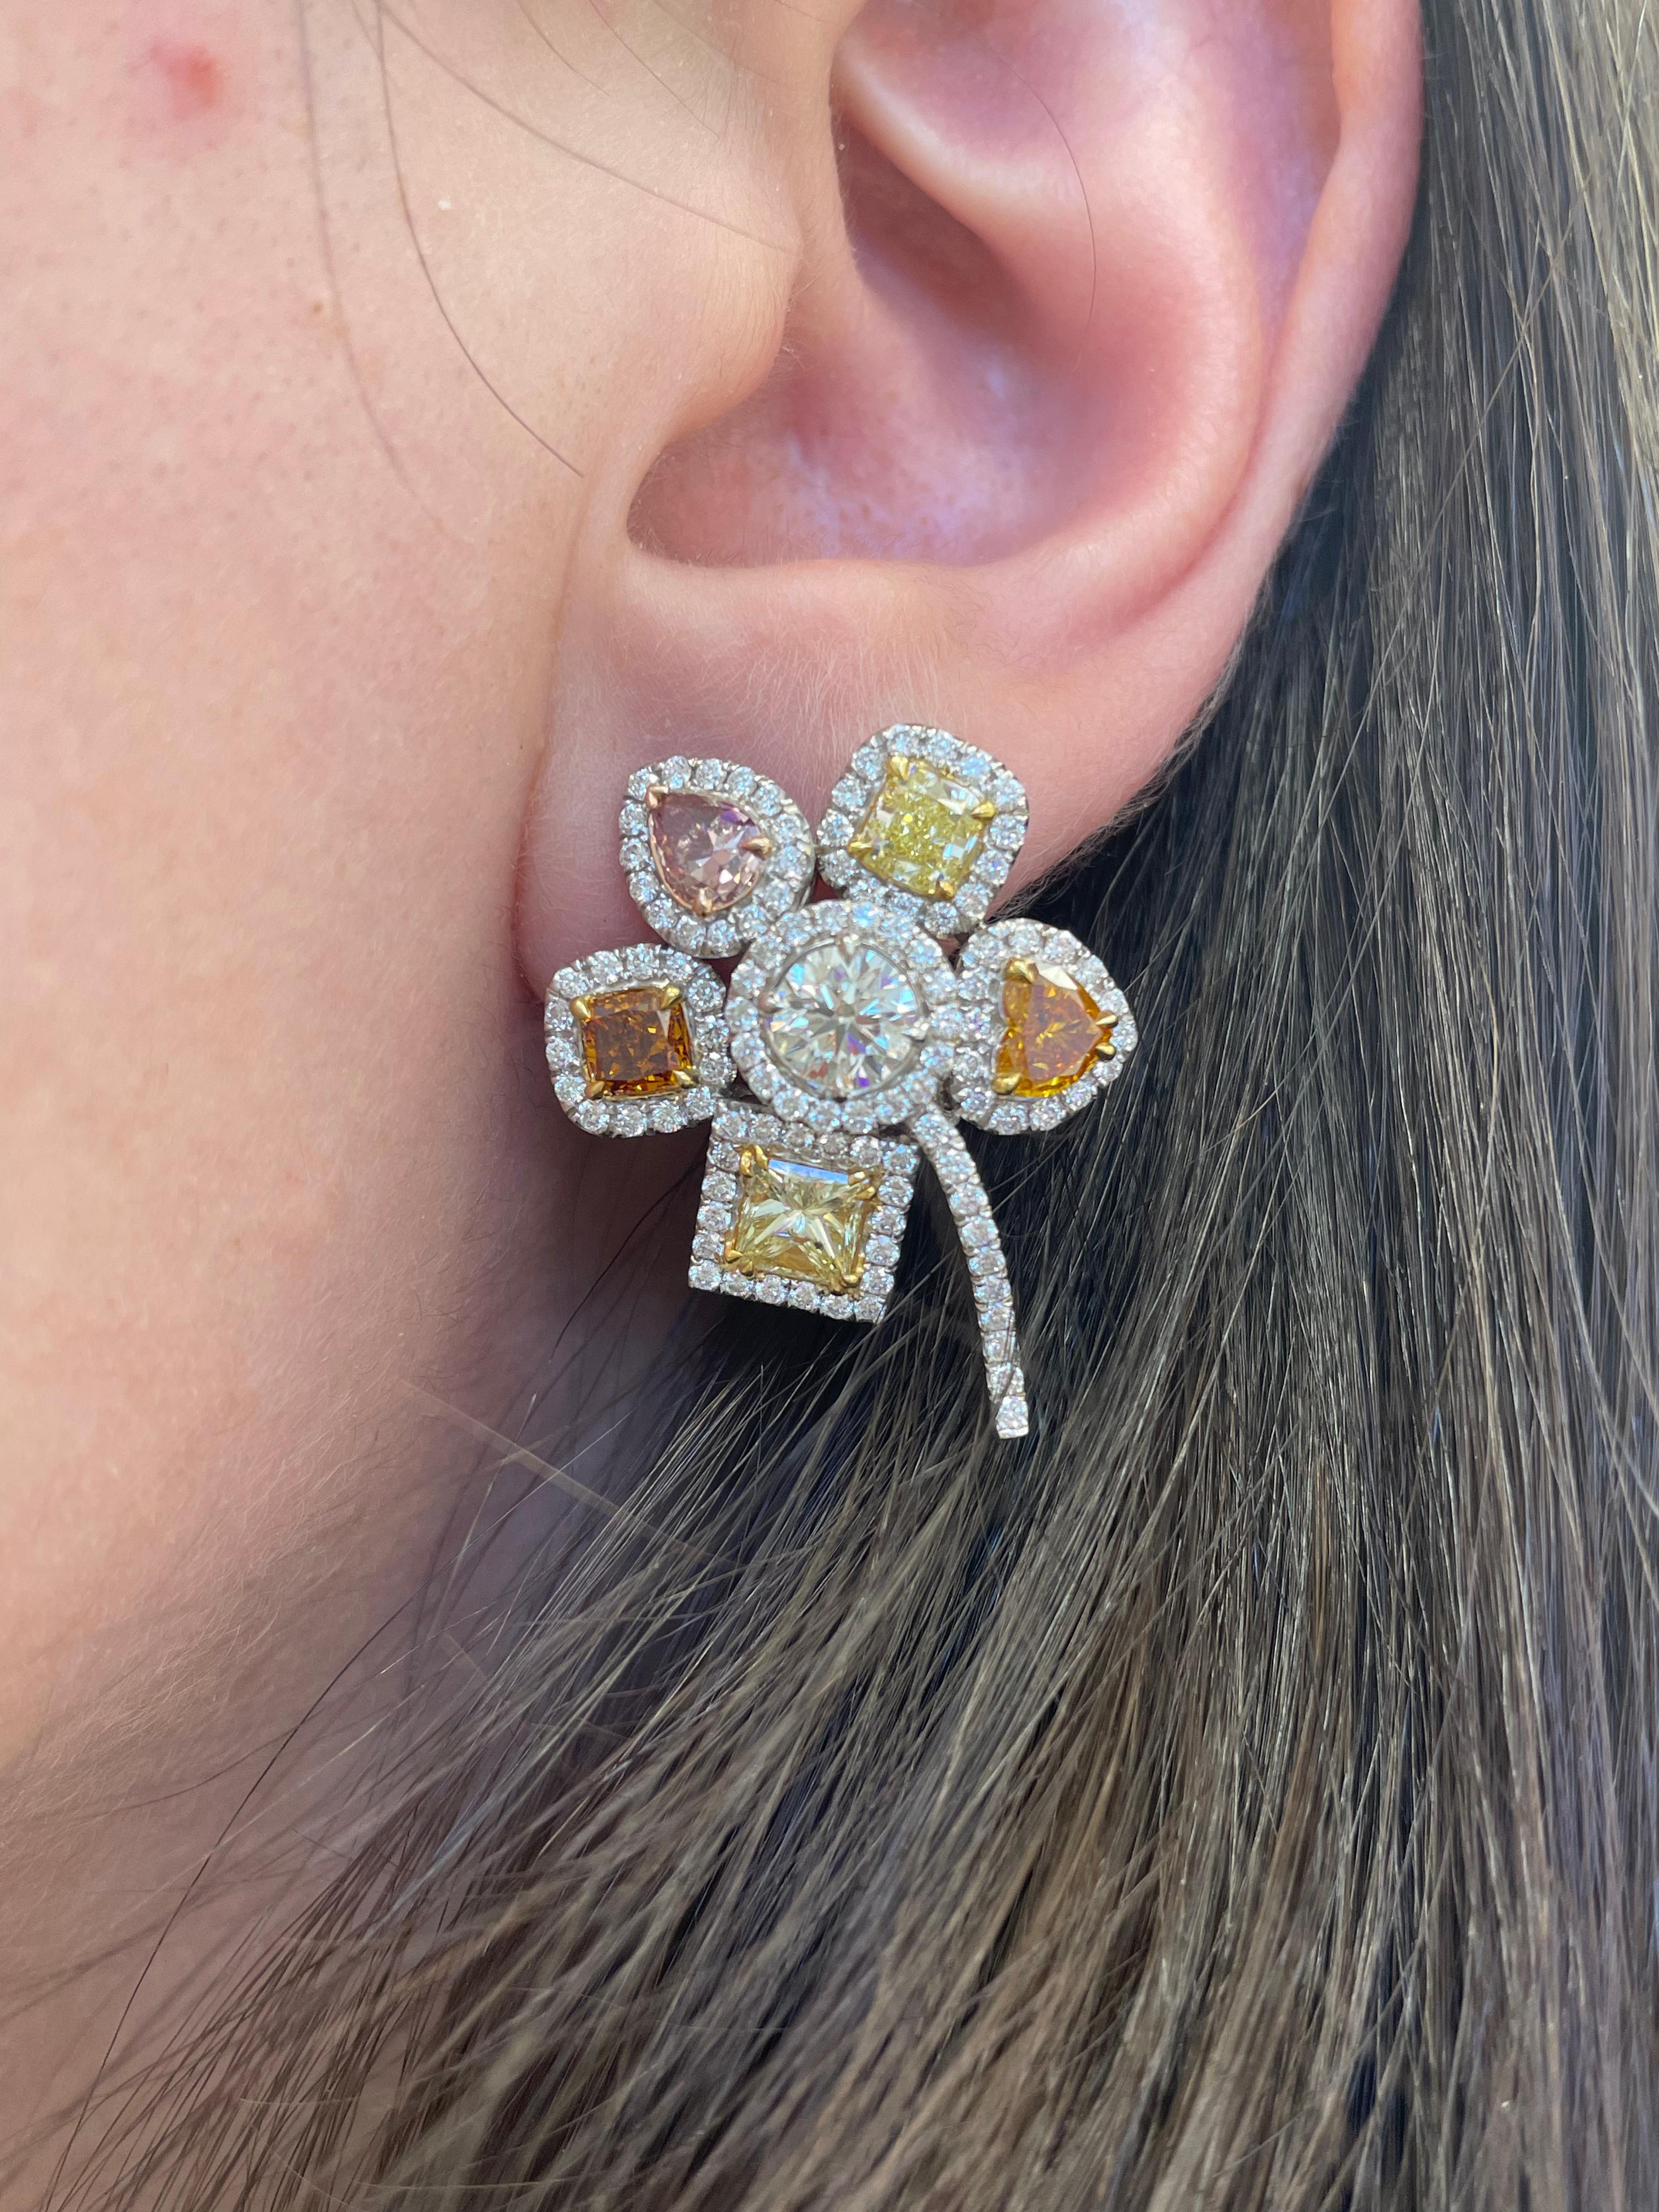 Stunning fancy color diamond floral earrings, GIA certified. High jewelry by Alexander Beverly Hills.
7.52 carats total diamond weight. 
10 fancy color diamonds, 2 GIA certified, 4.56 carats. Ranging from Light to Fancy in Yellows, Oranges, and